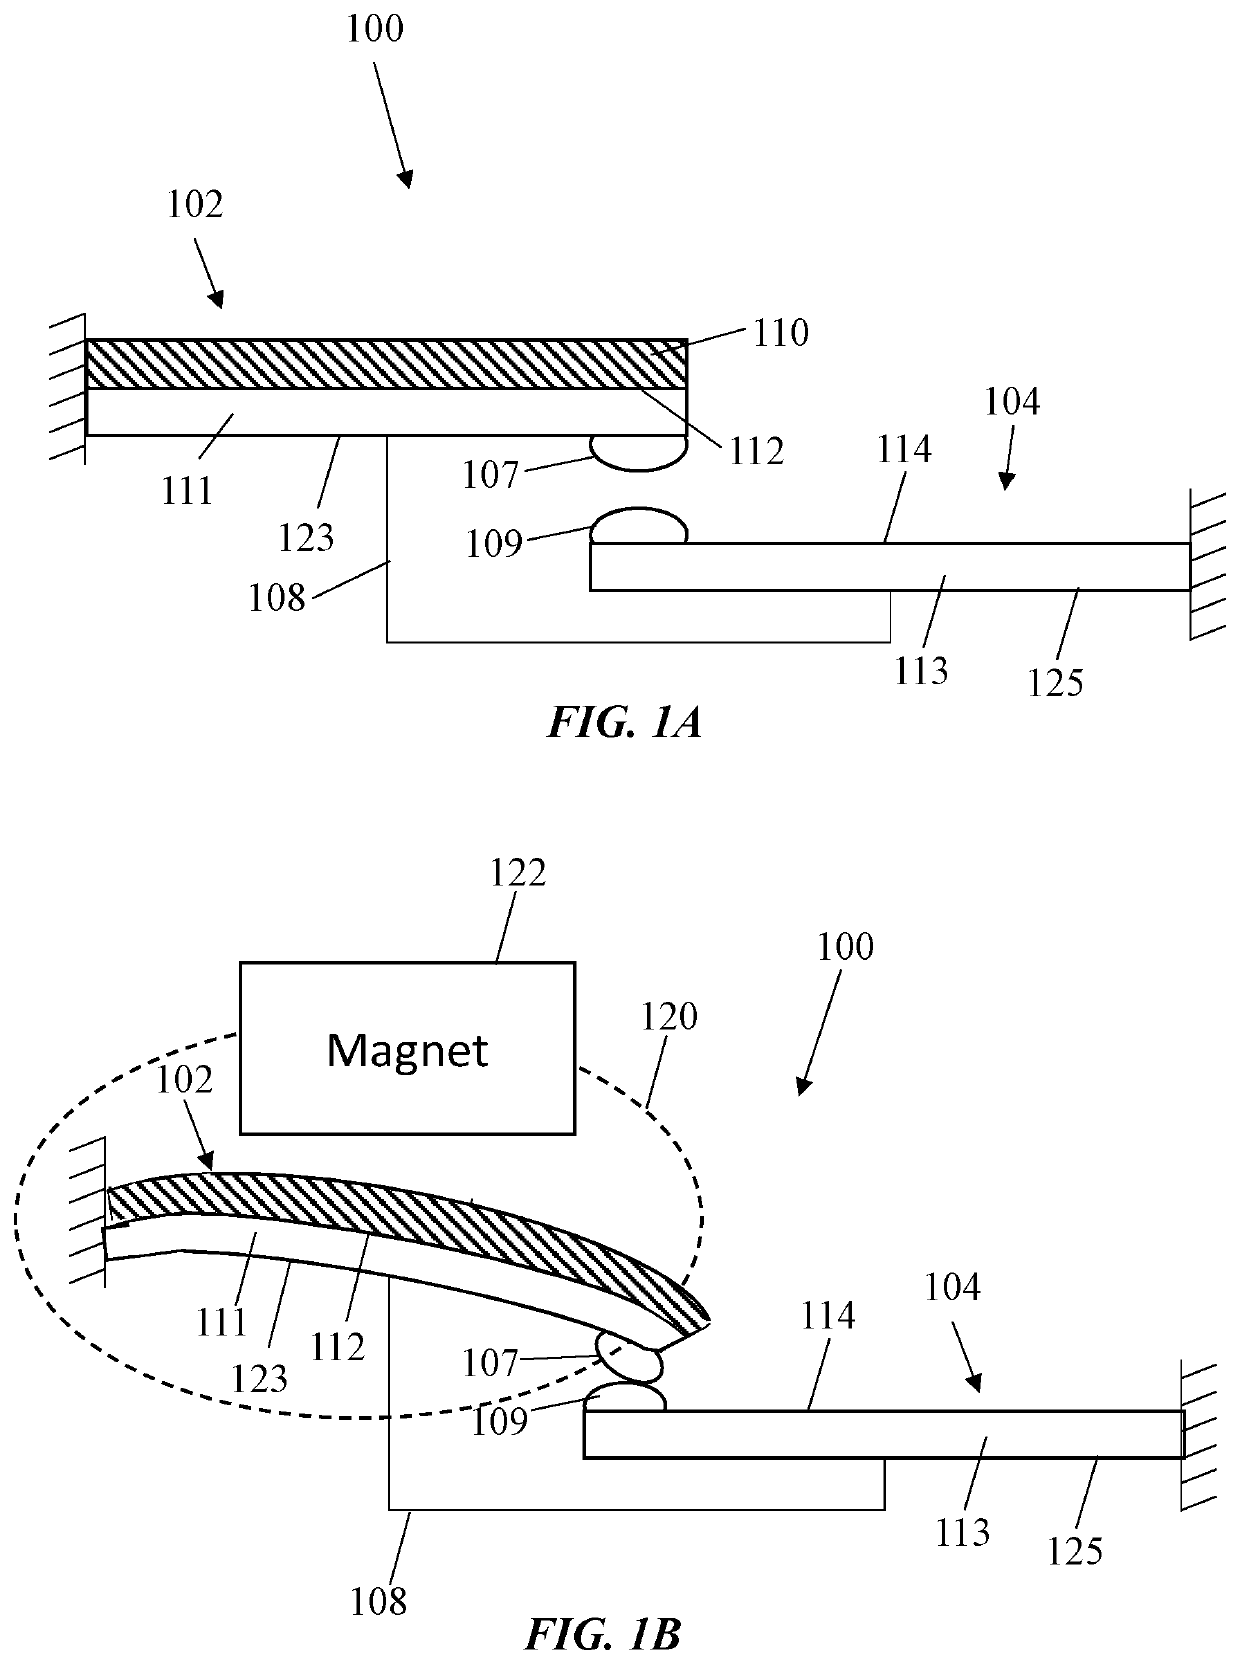 Magnetically activated switch having magnetostrictive material